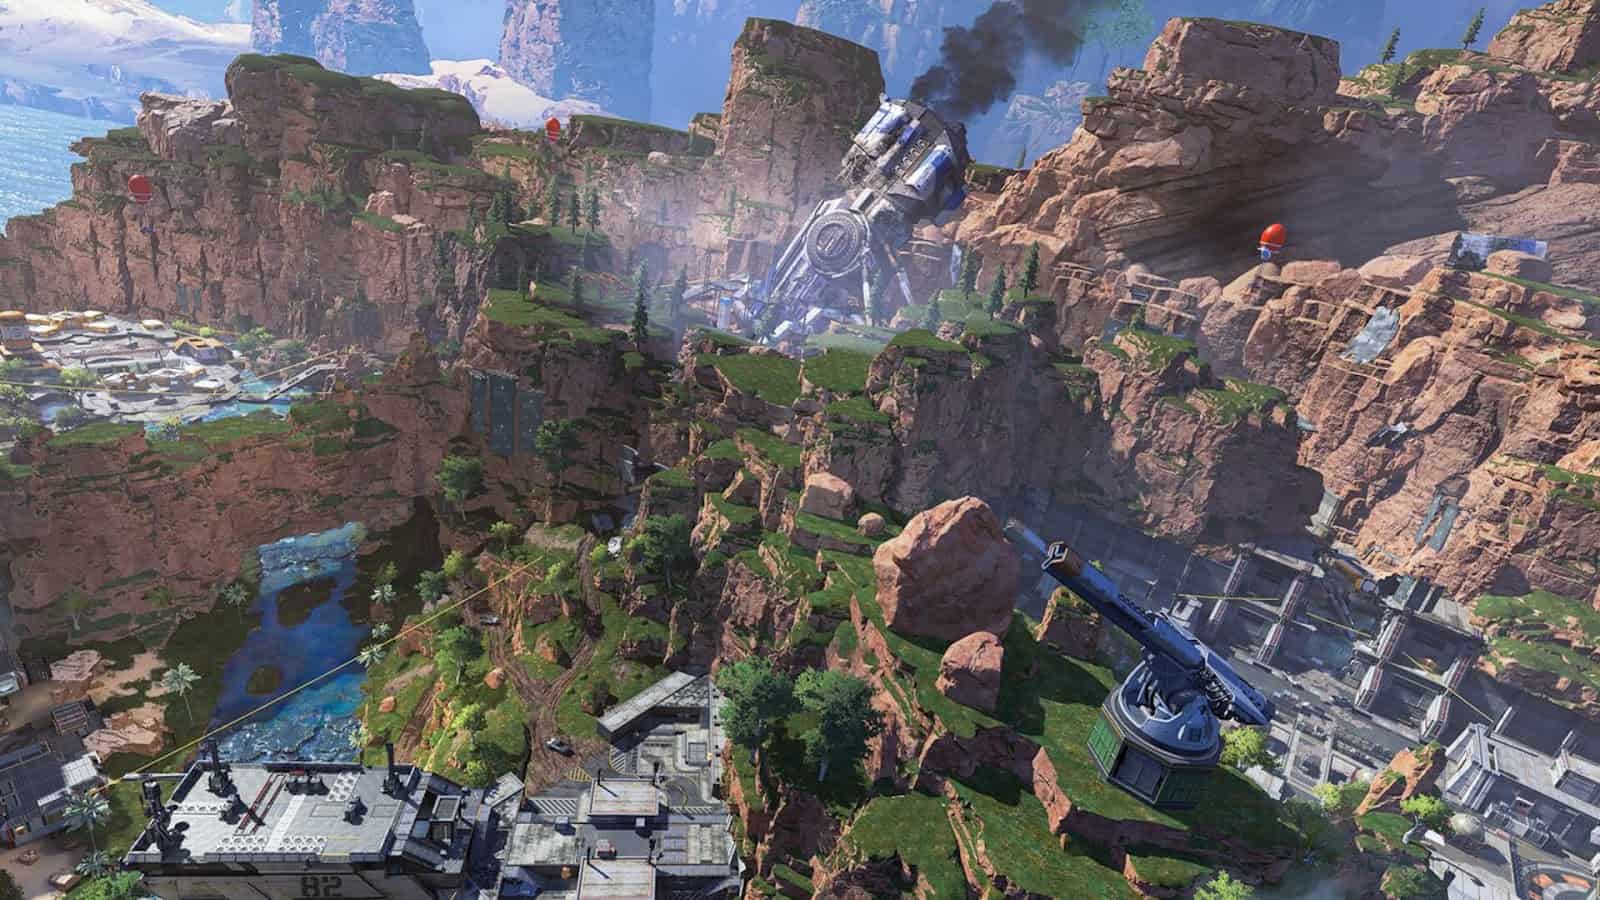 Aerial view of King's Canyon from Apex Legends